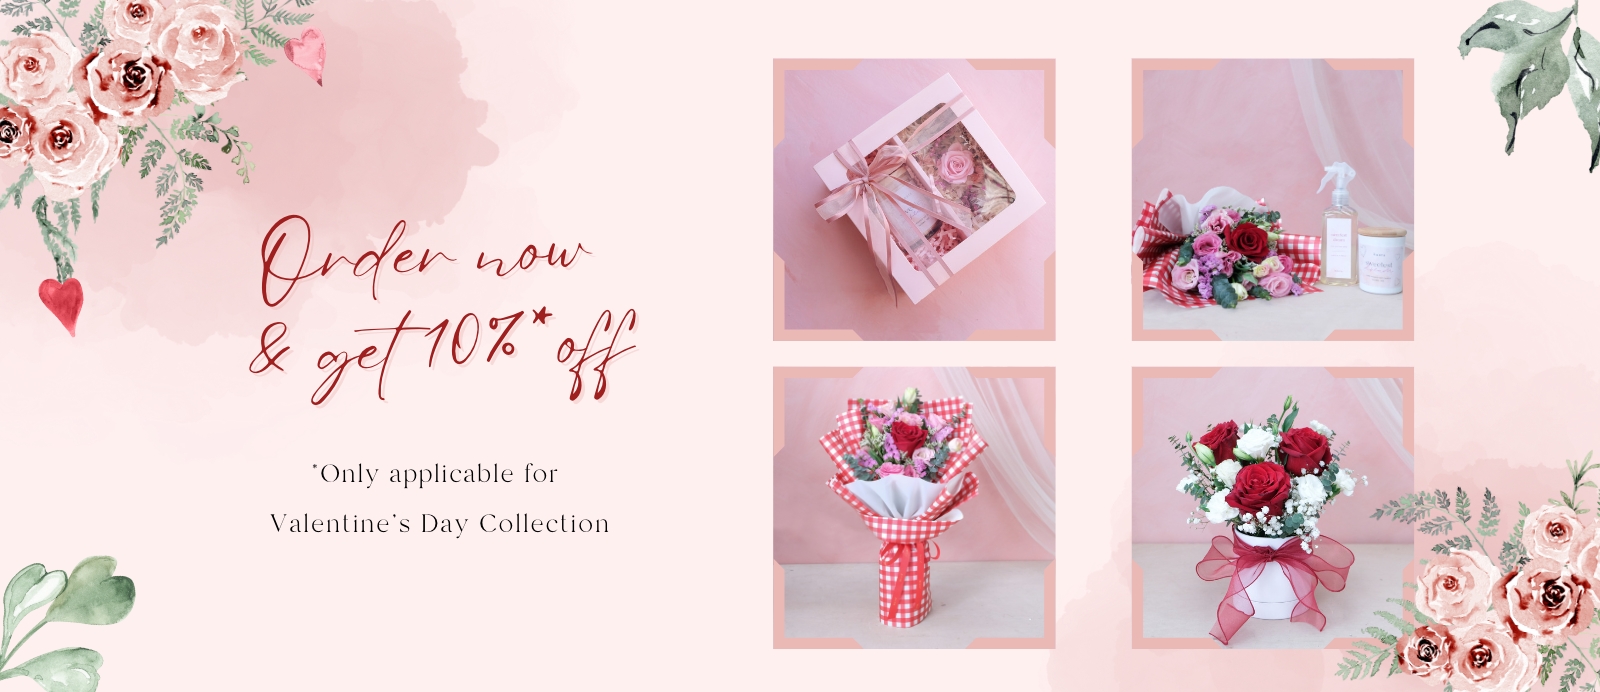 10% off Vday Collection